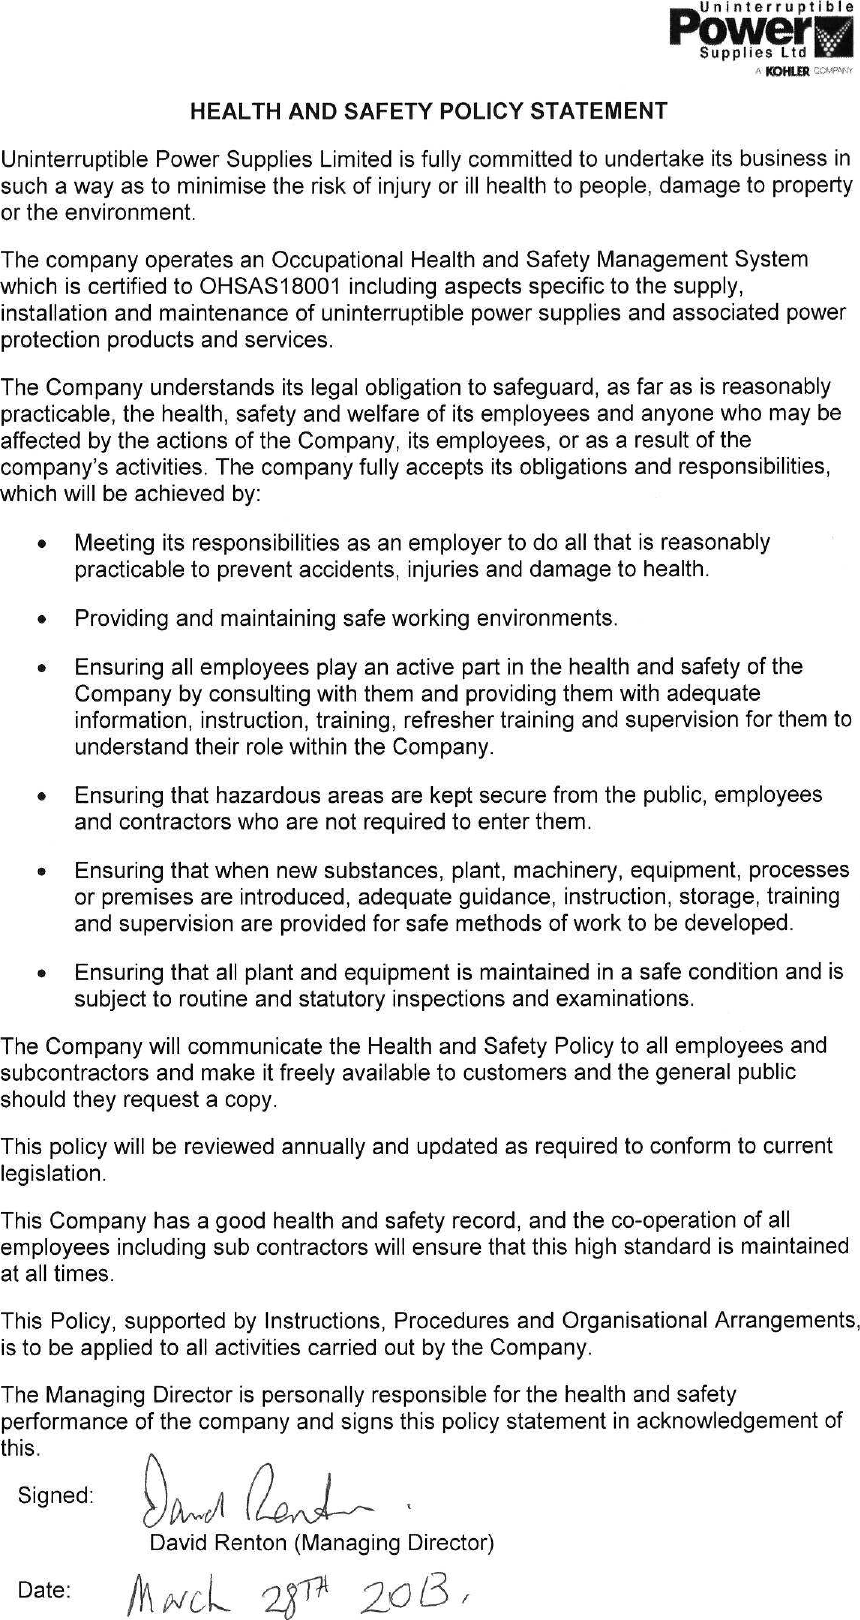 Page 1 of 1 - UPSL Health-and-Safety-Policy-Statement 2013